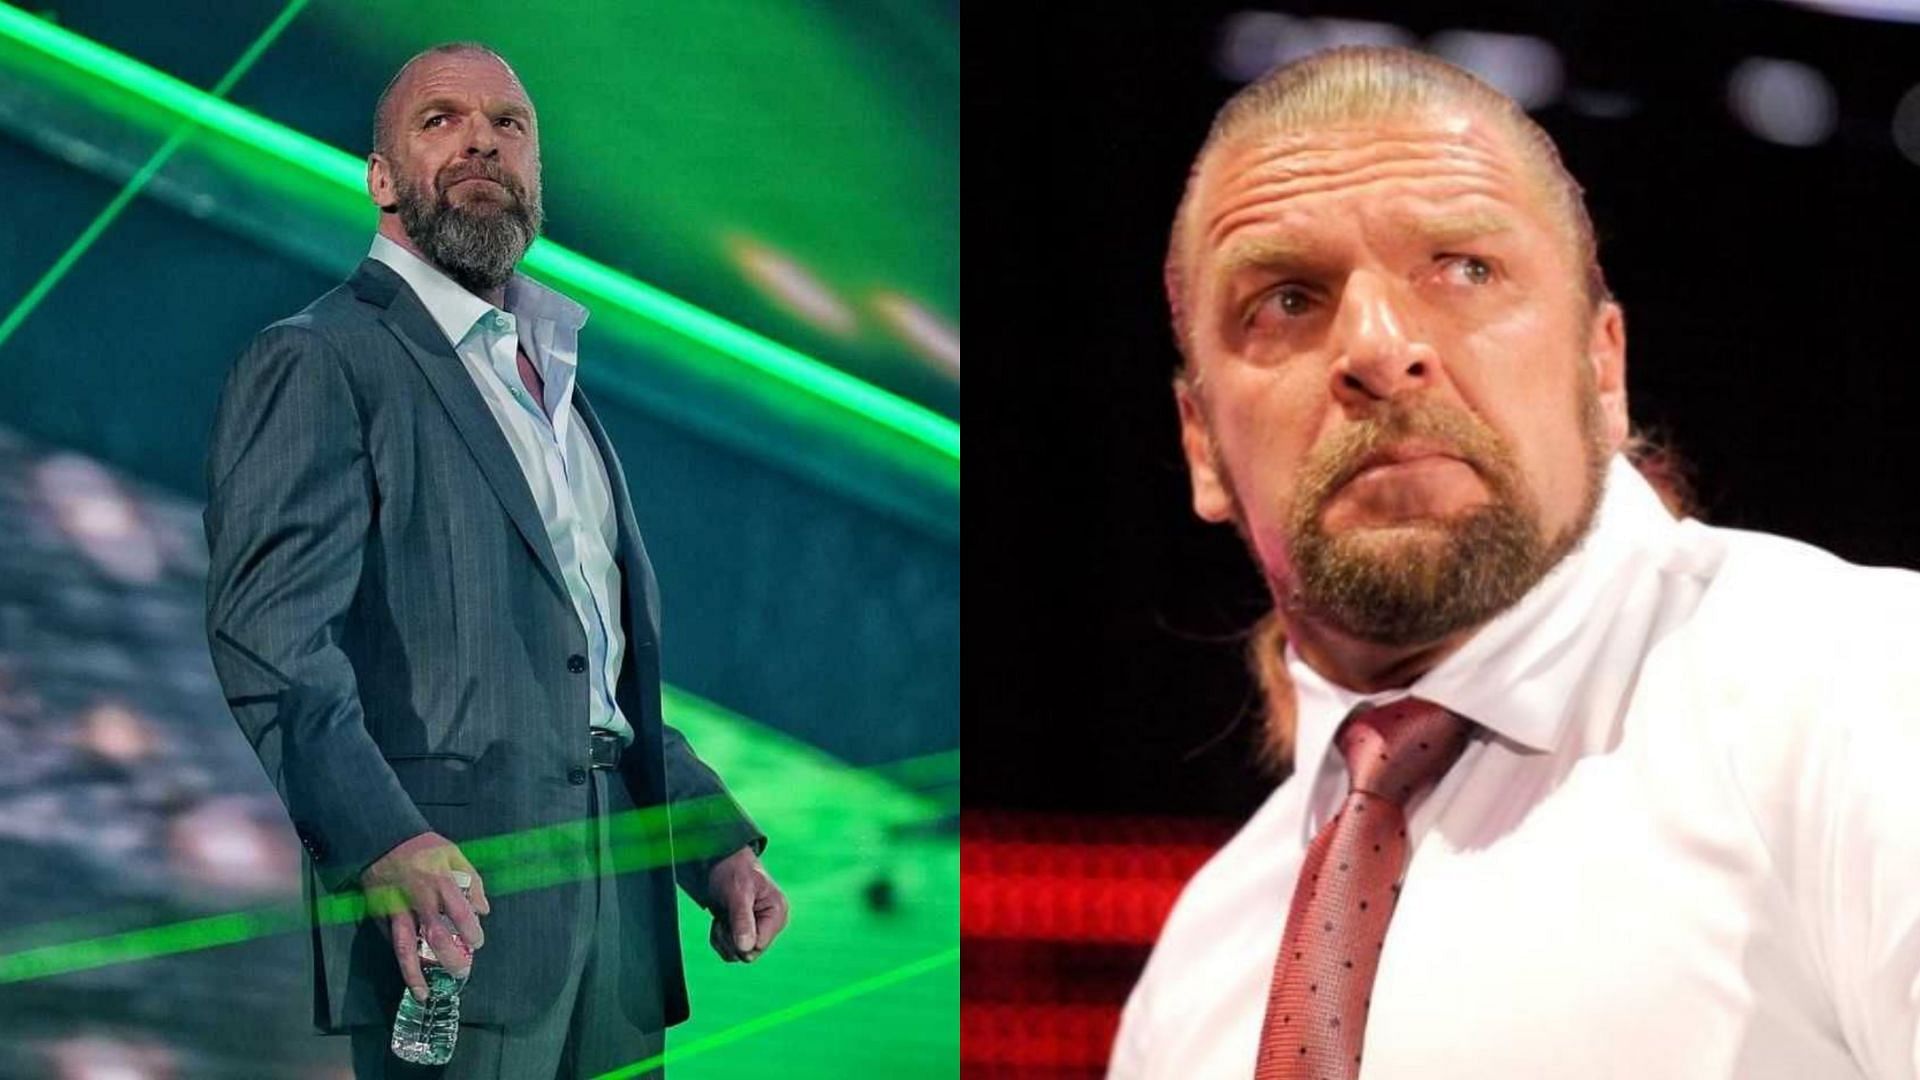 Five WWE Superstars and their first impression of Triple H